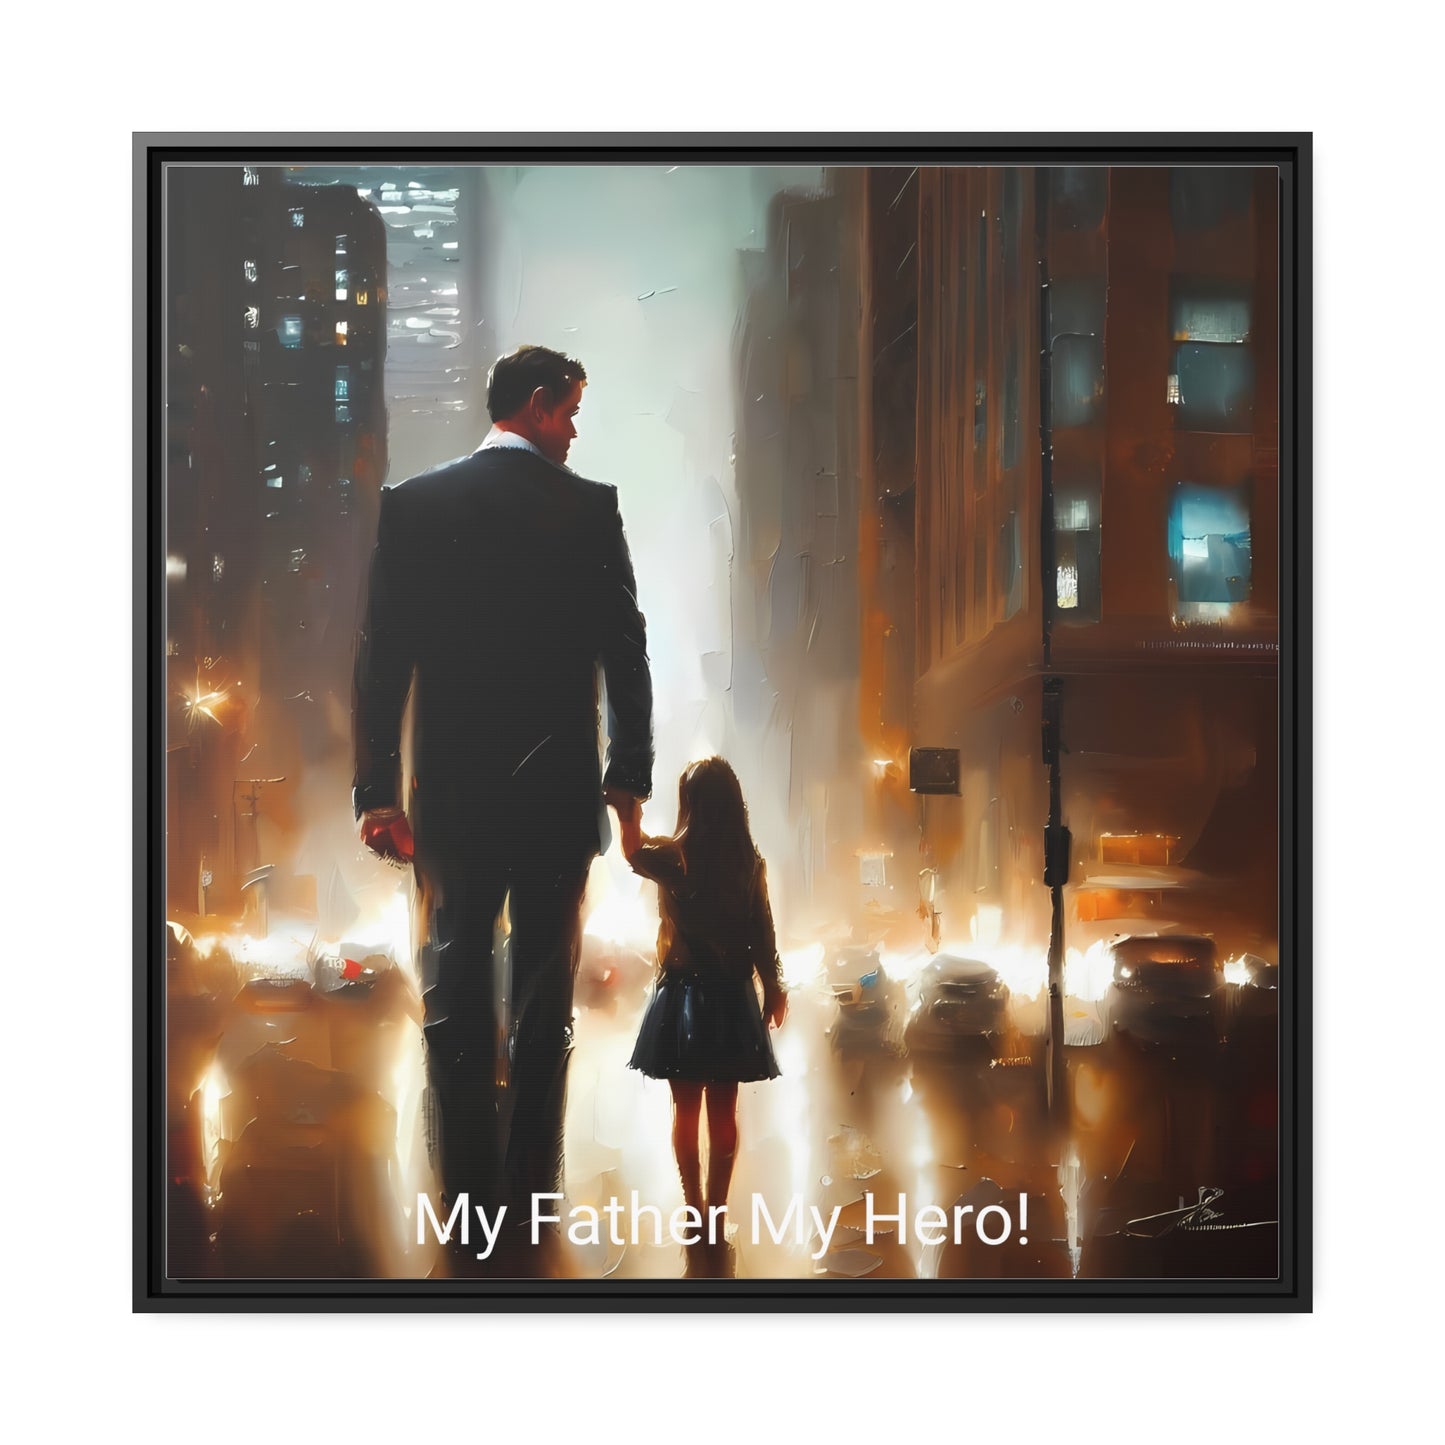 Awesome Matte Wall Art Canvas Decor Black Frame - My Father My Hero! Fathers Day Gift Item